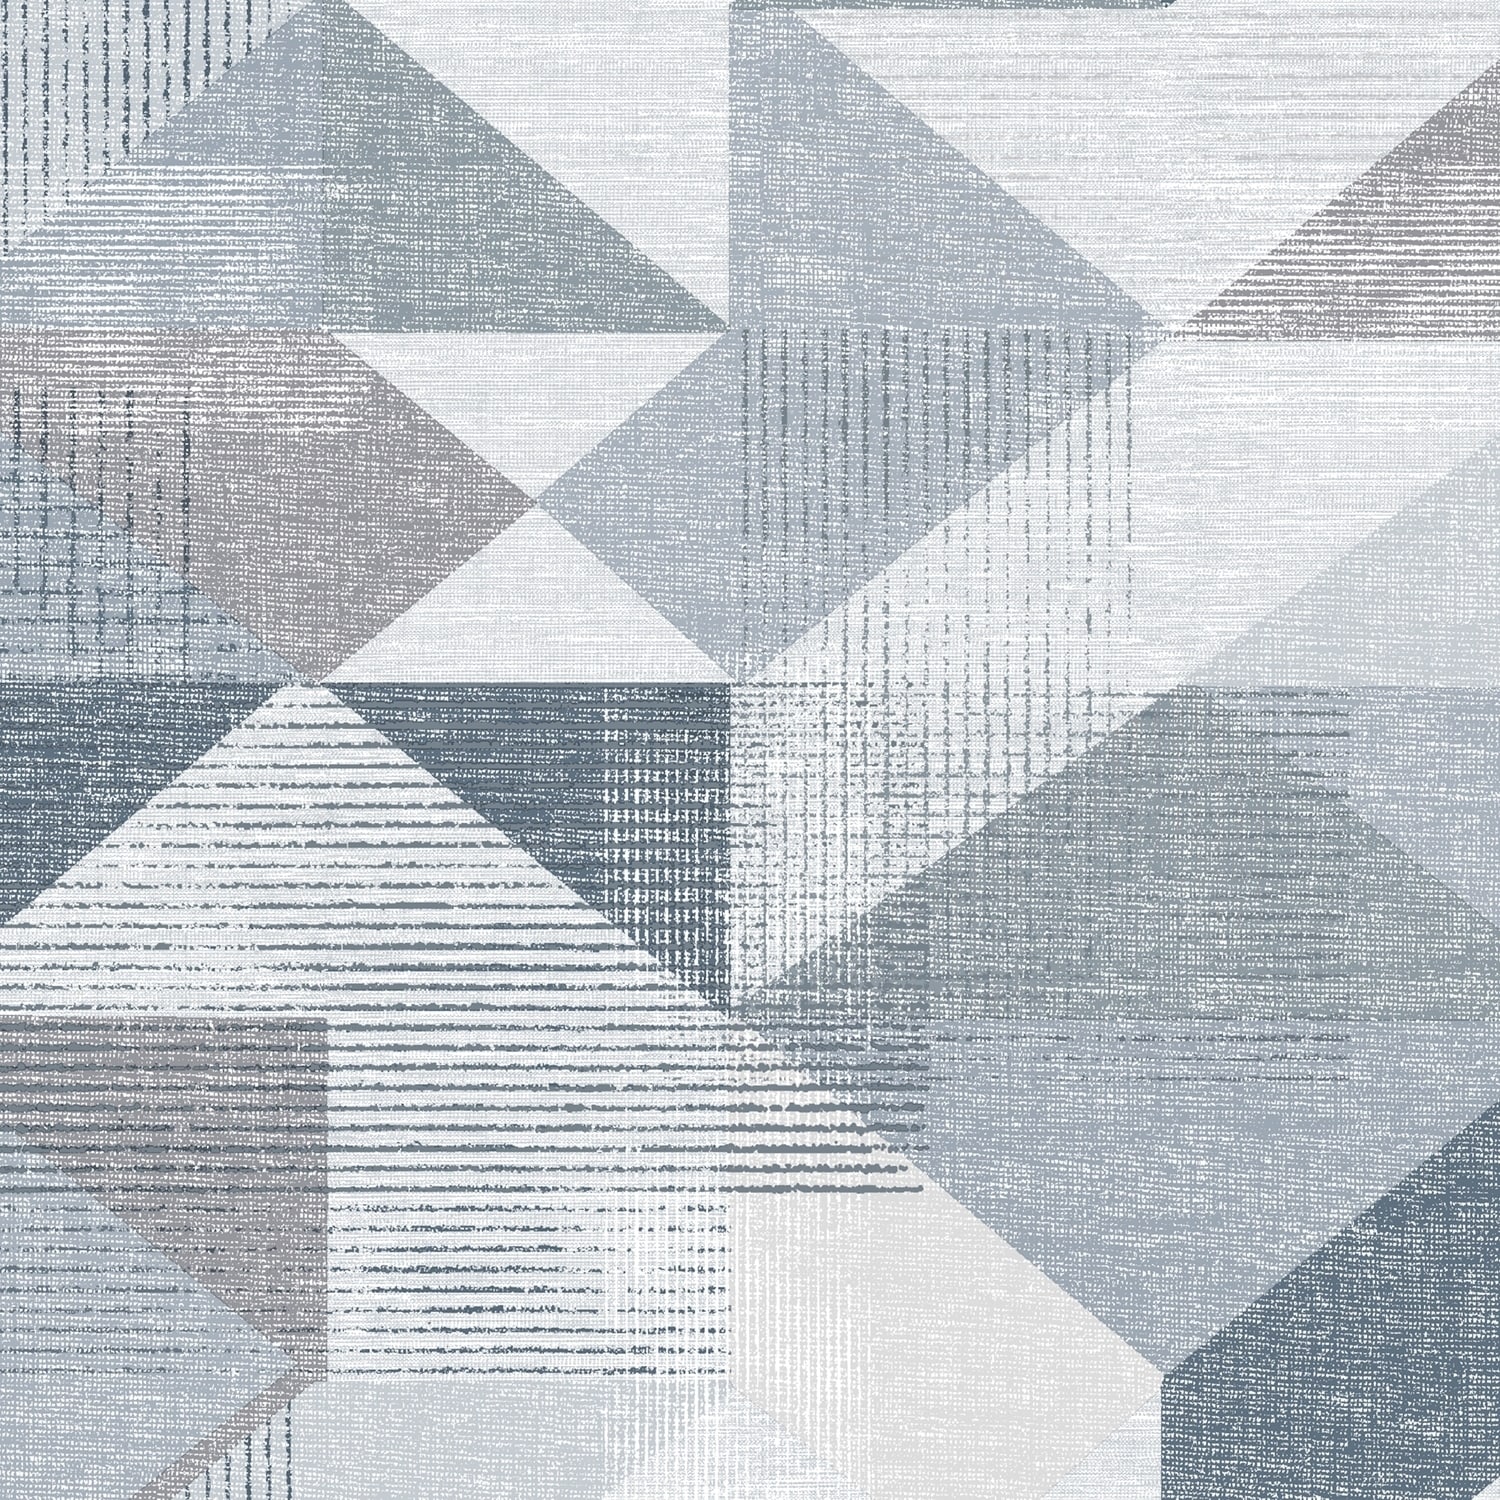 Buy Geometric Wallpaper Online at Overstock | Our Best Wall Coverings Deals